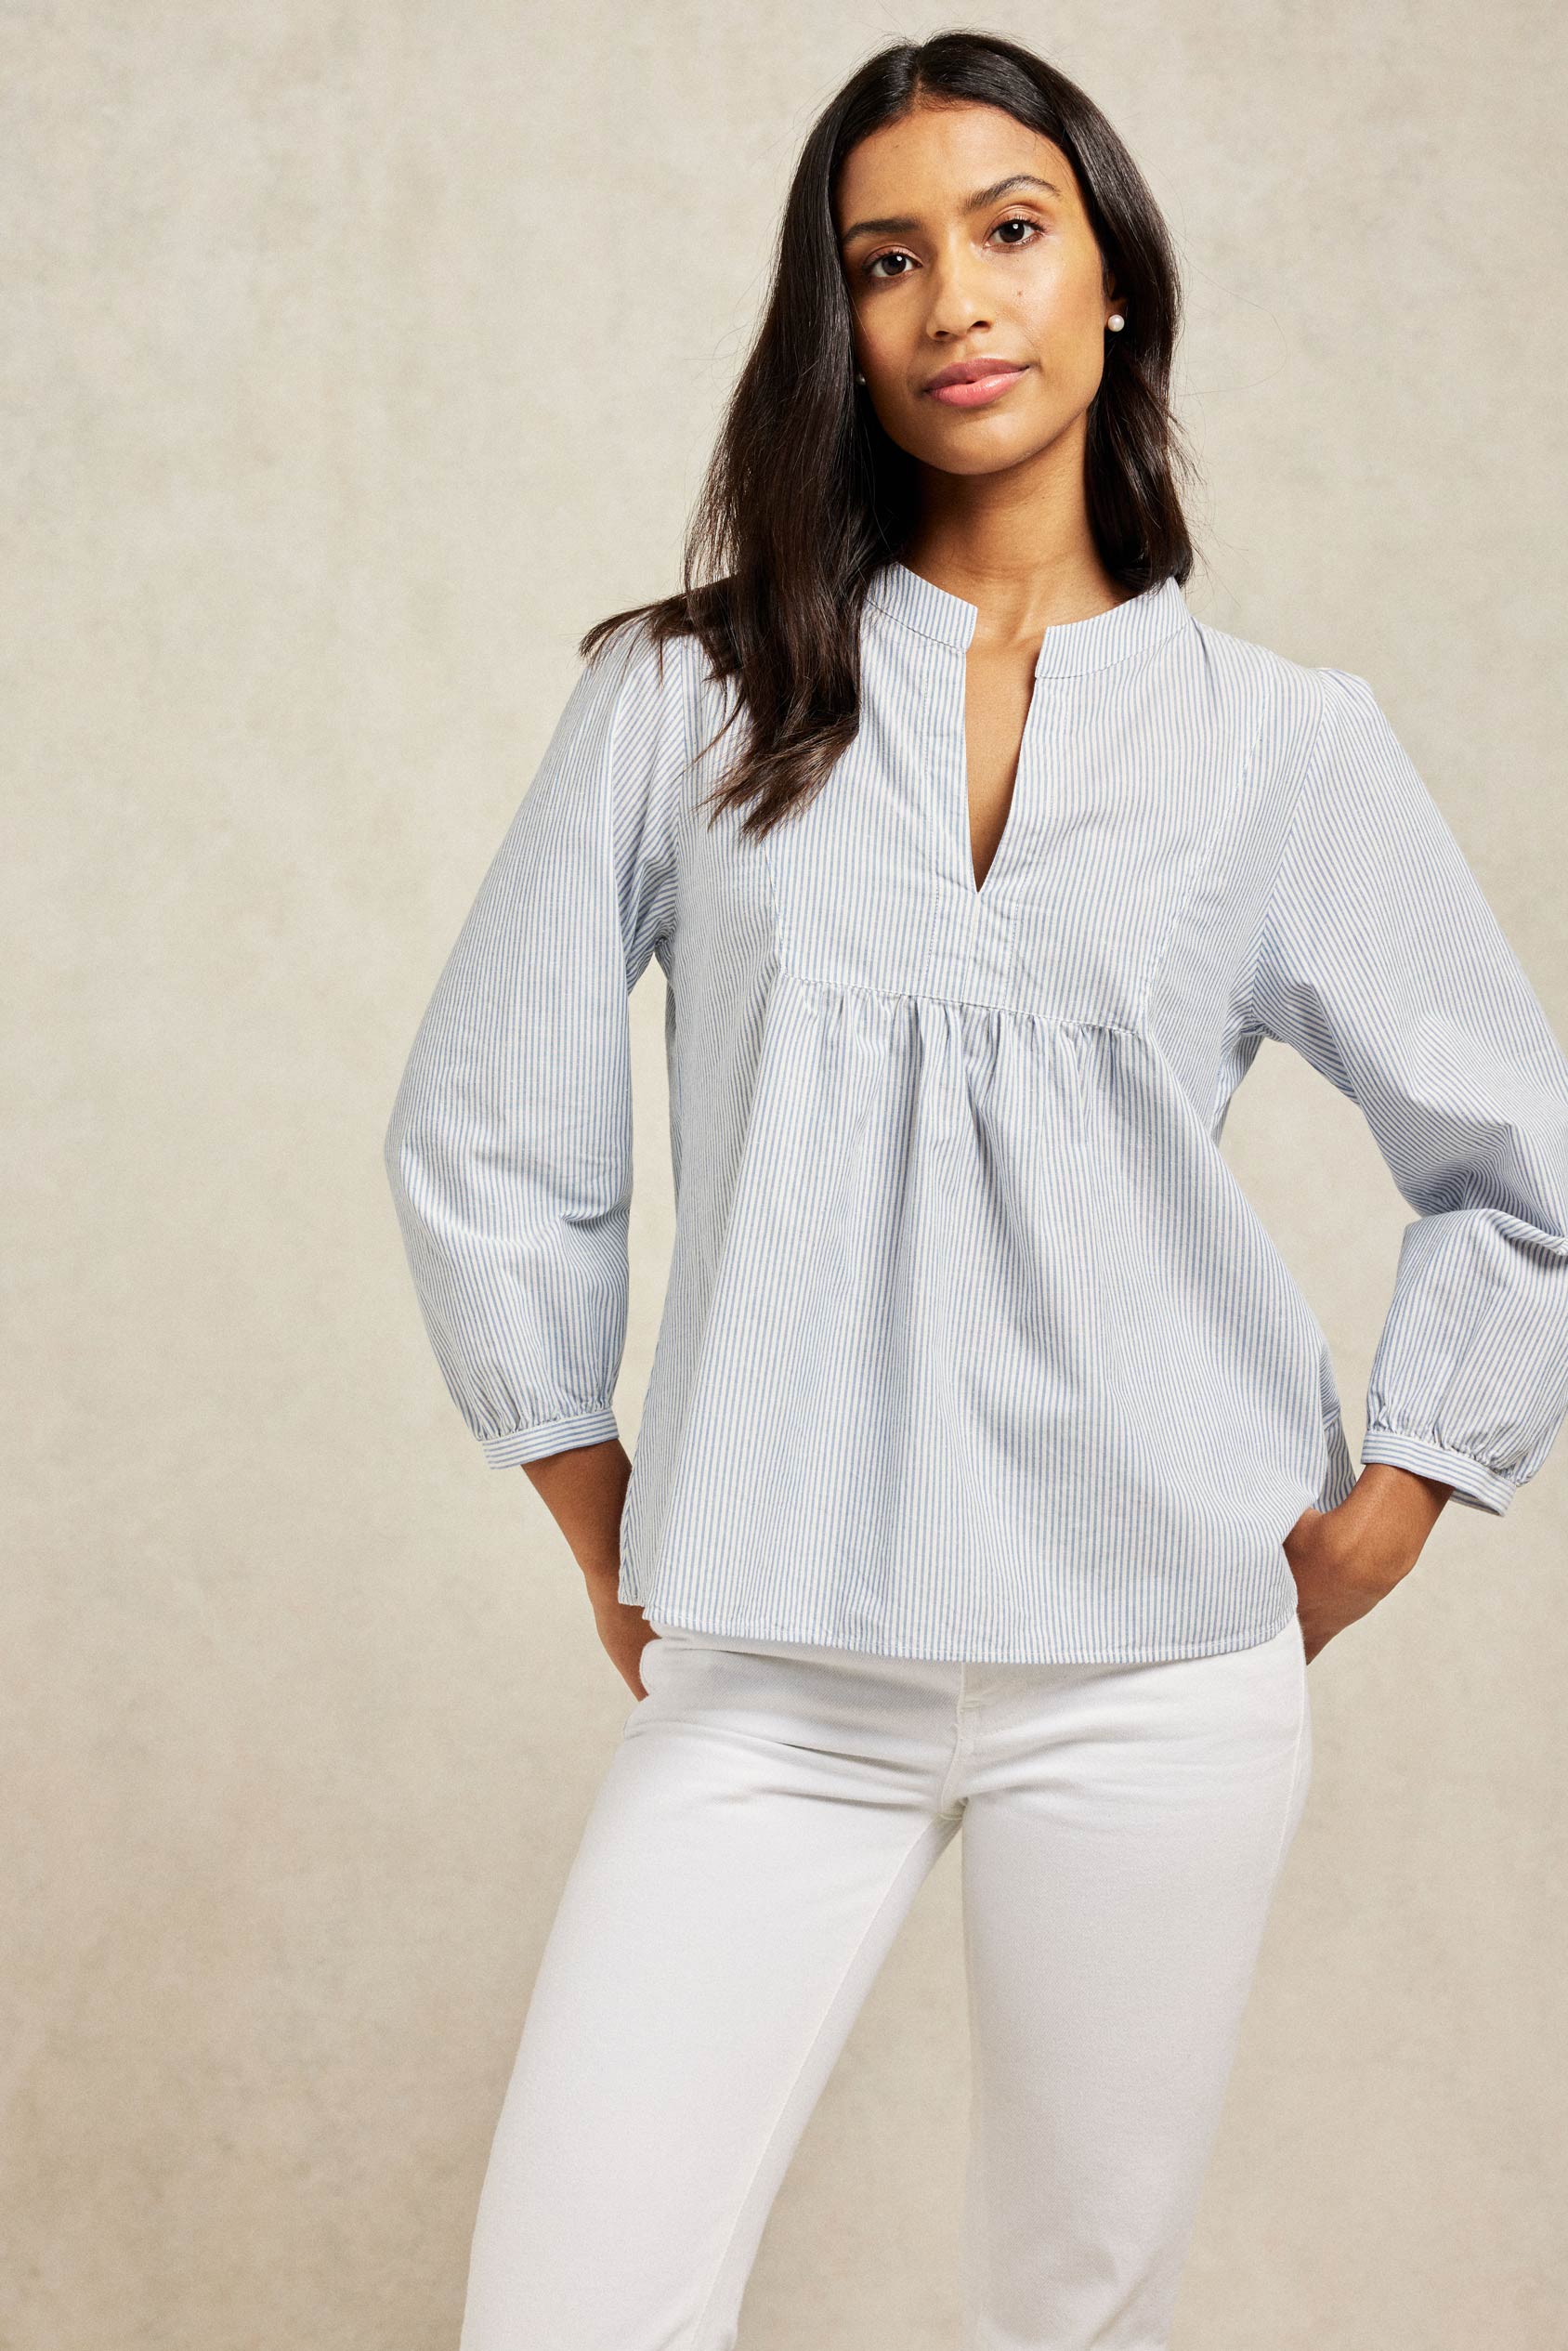 Pop over women’s top with cut away neckline and front panel with gathering for movement. The Aquilegia is a keeper, shaped with an ultra-flattering cut-away neckline and gathering at the front. Boyfriend fit. Casual wear. Size XS, S, M, L, XL. Made in Portugal. Machine wash.